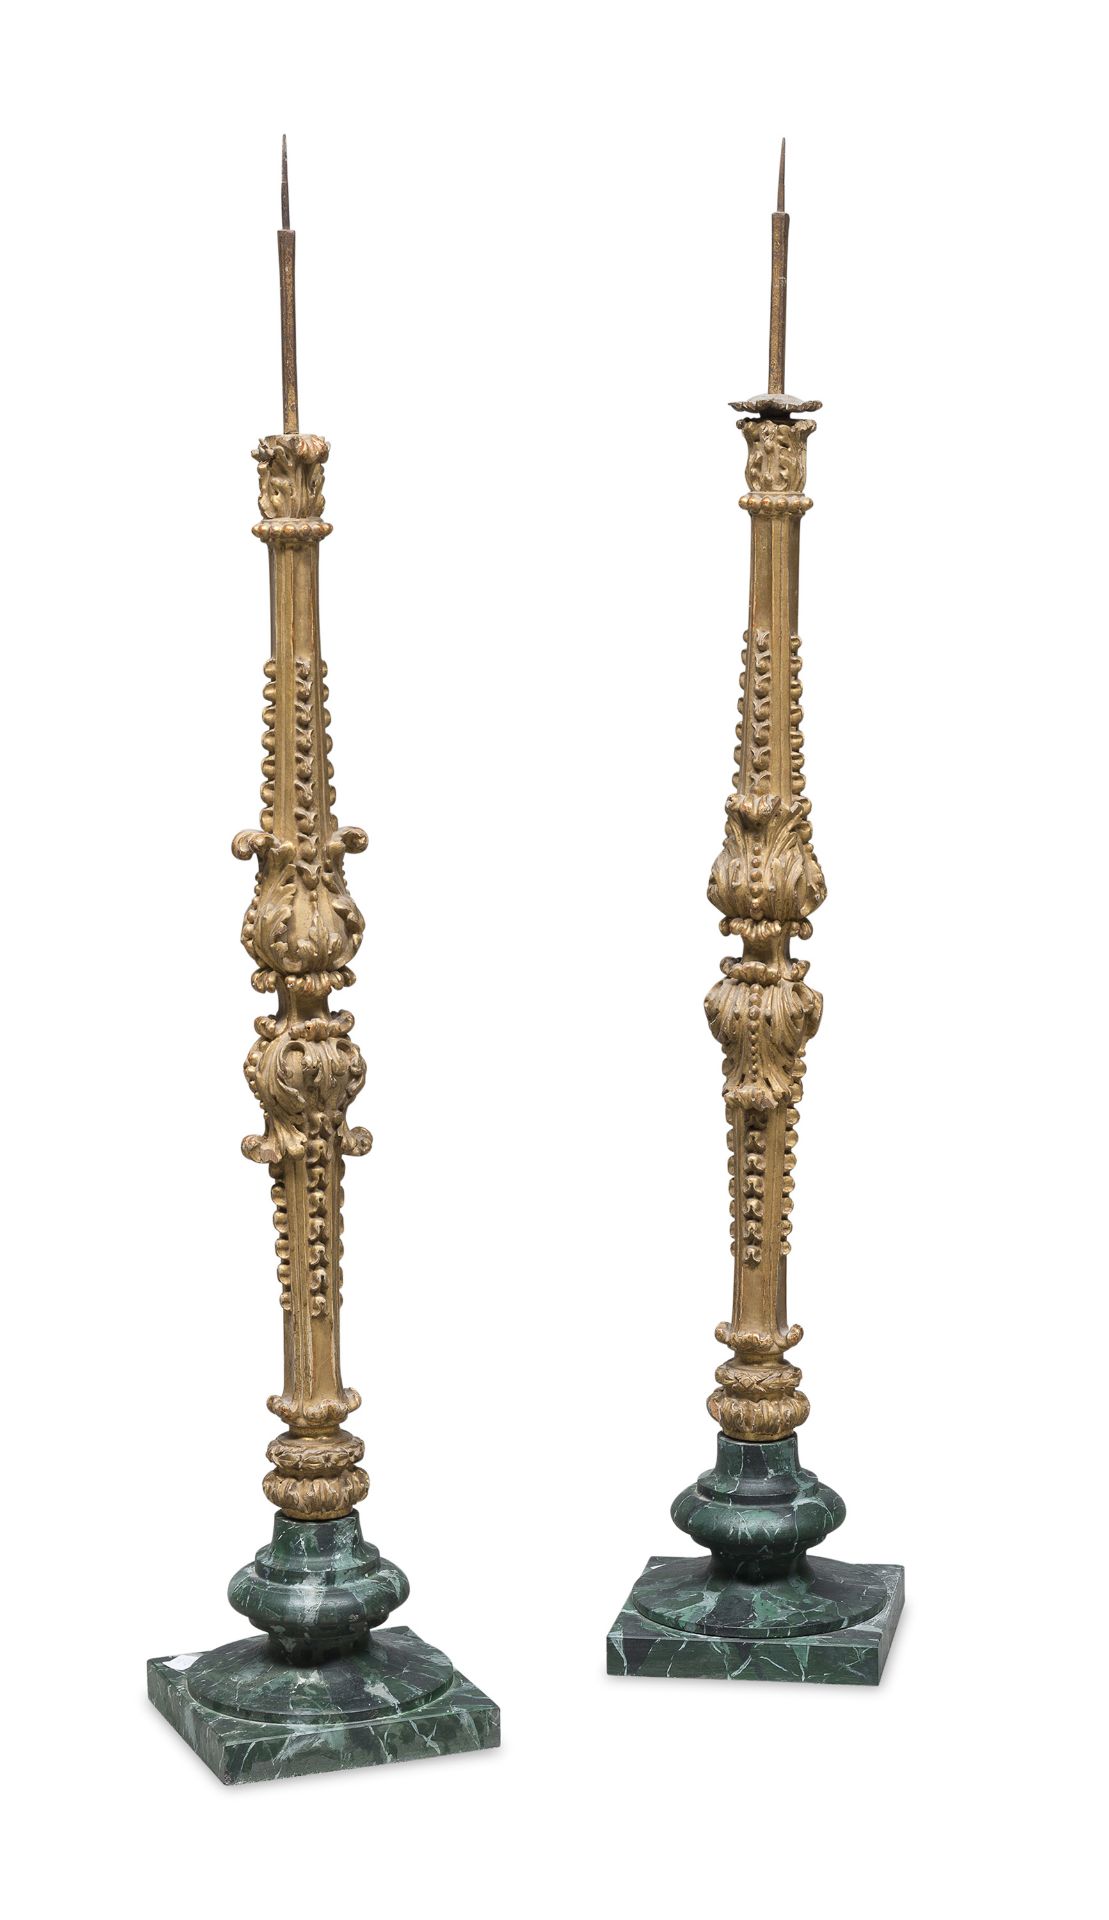 PAIR OF GILTWOOD CANDLESTICKS LATE 18TH CENTURY